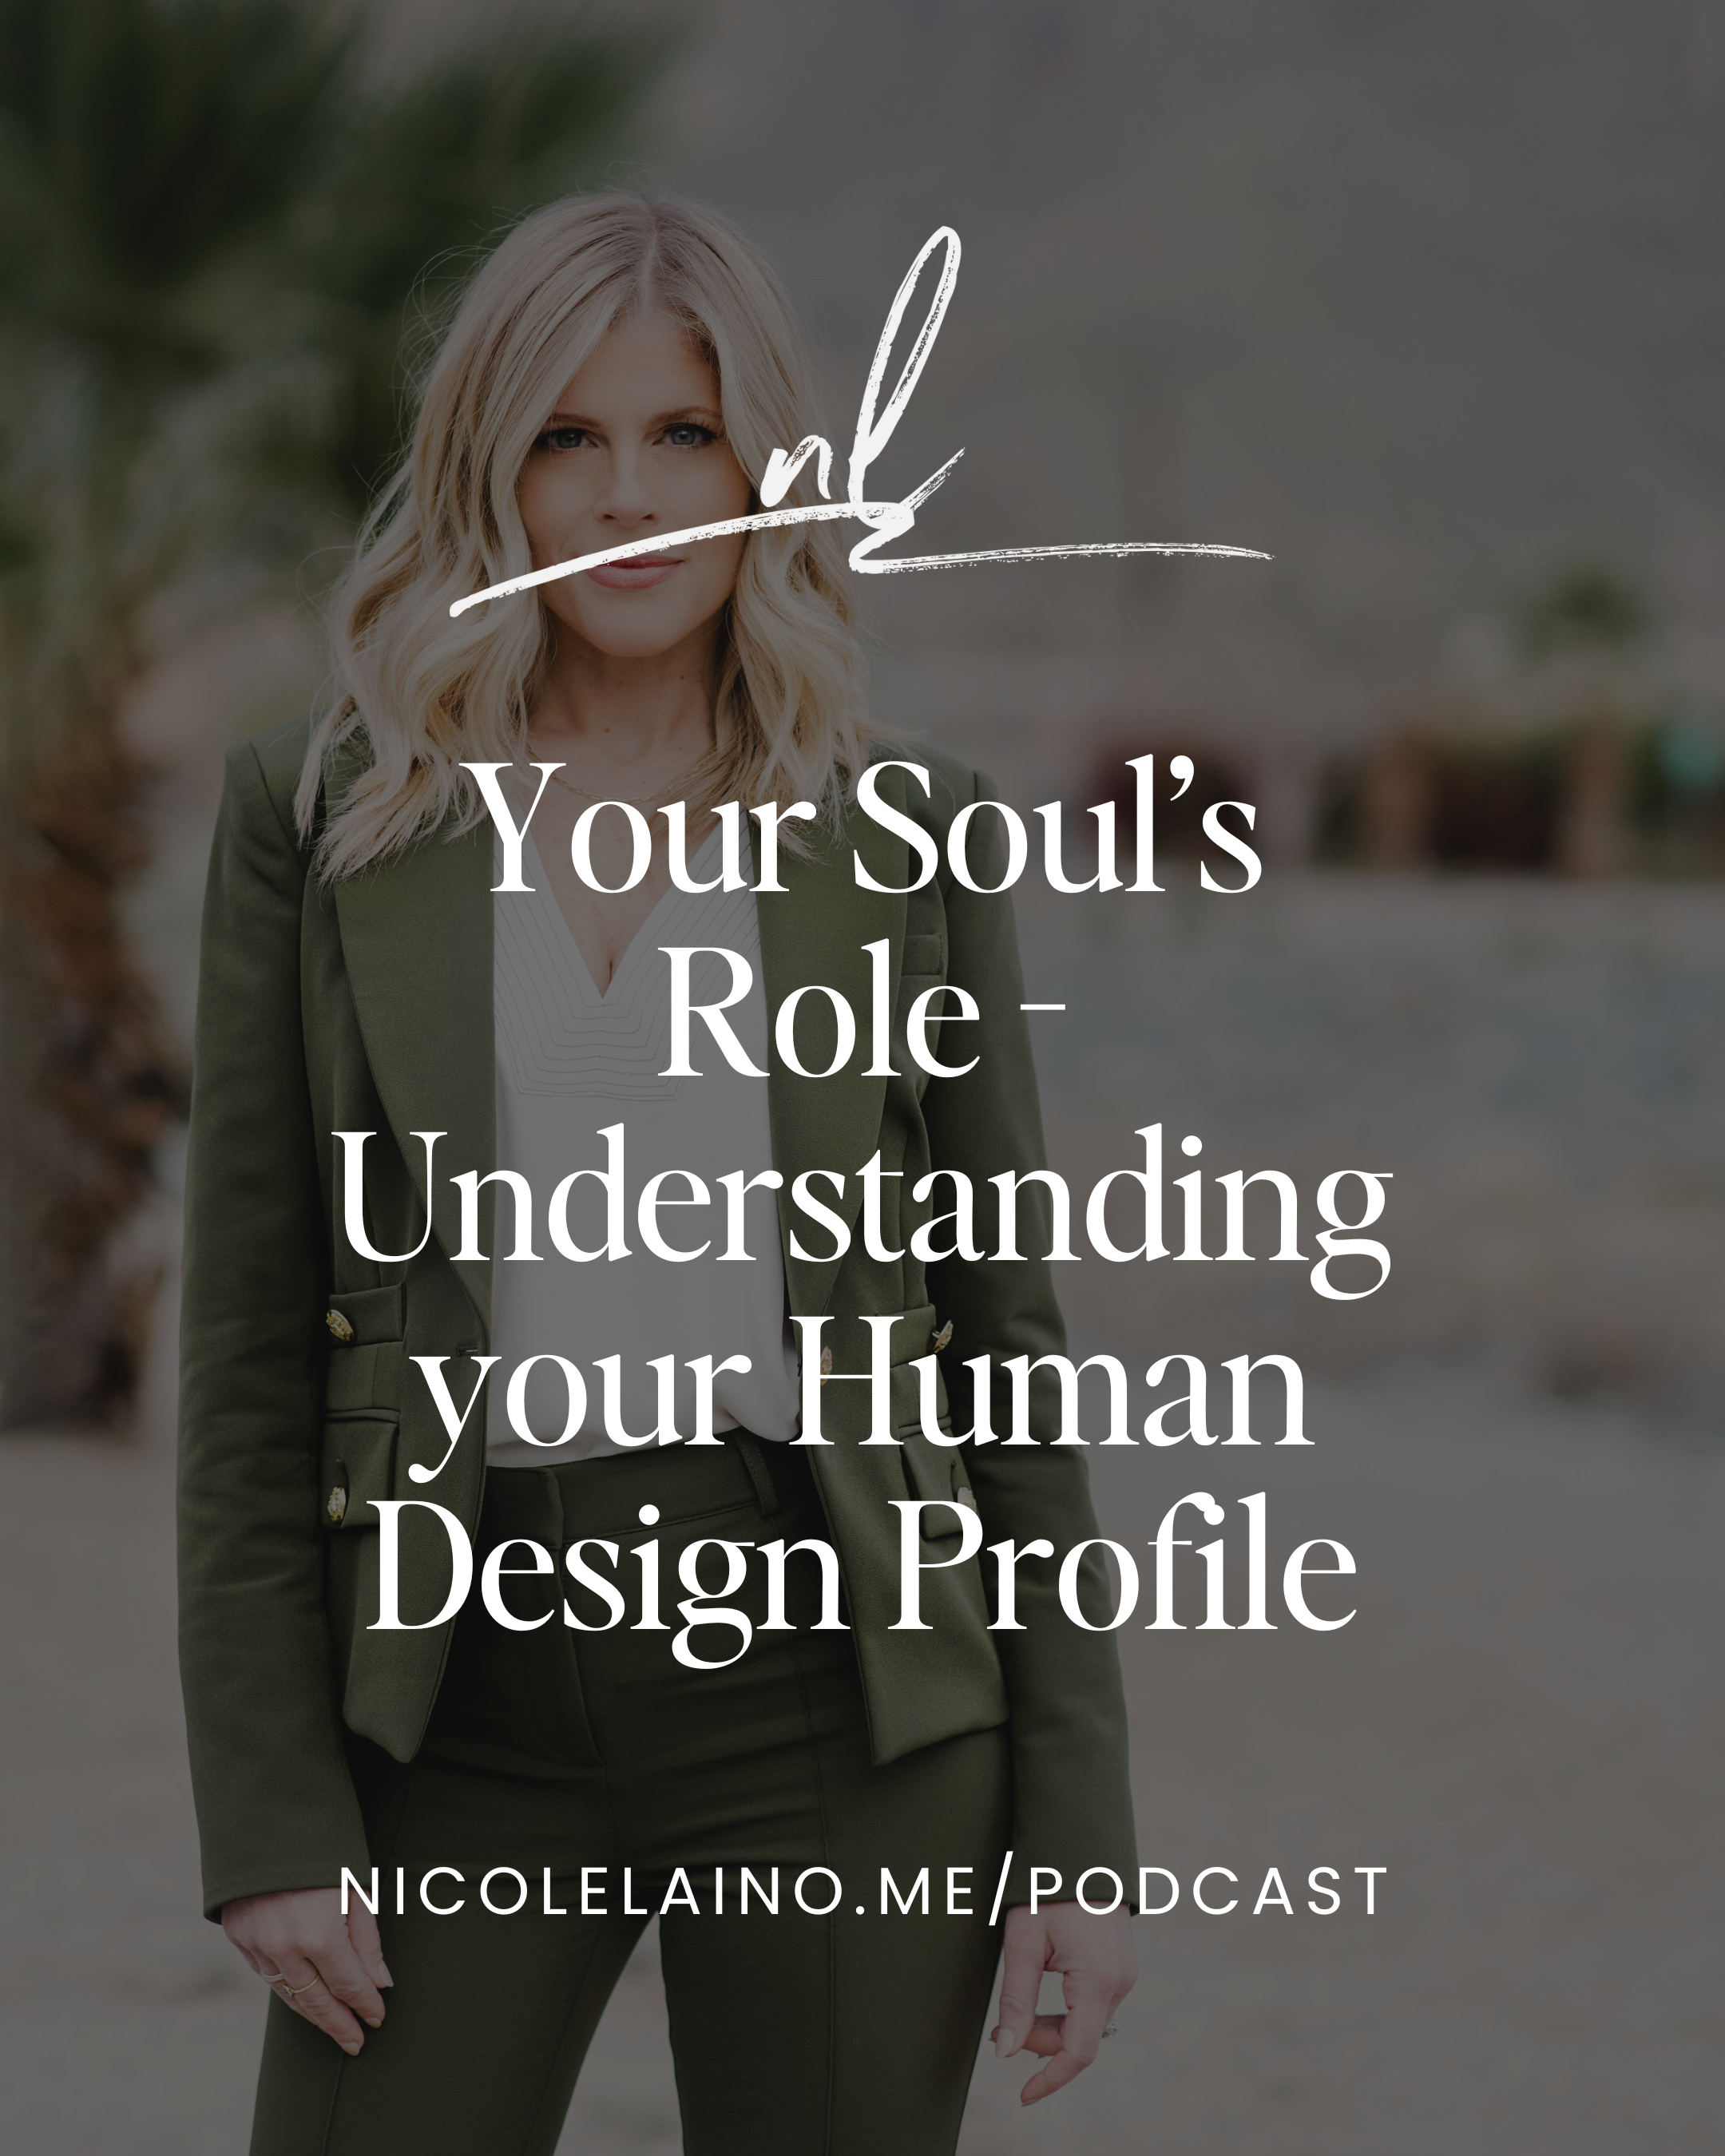 Your Soul’s Role - Understanding your Human Design Profile